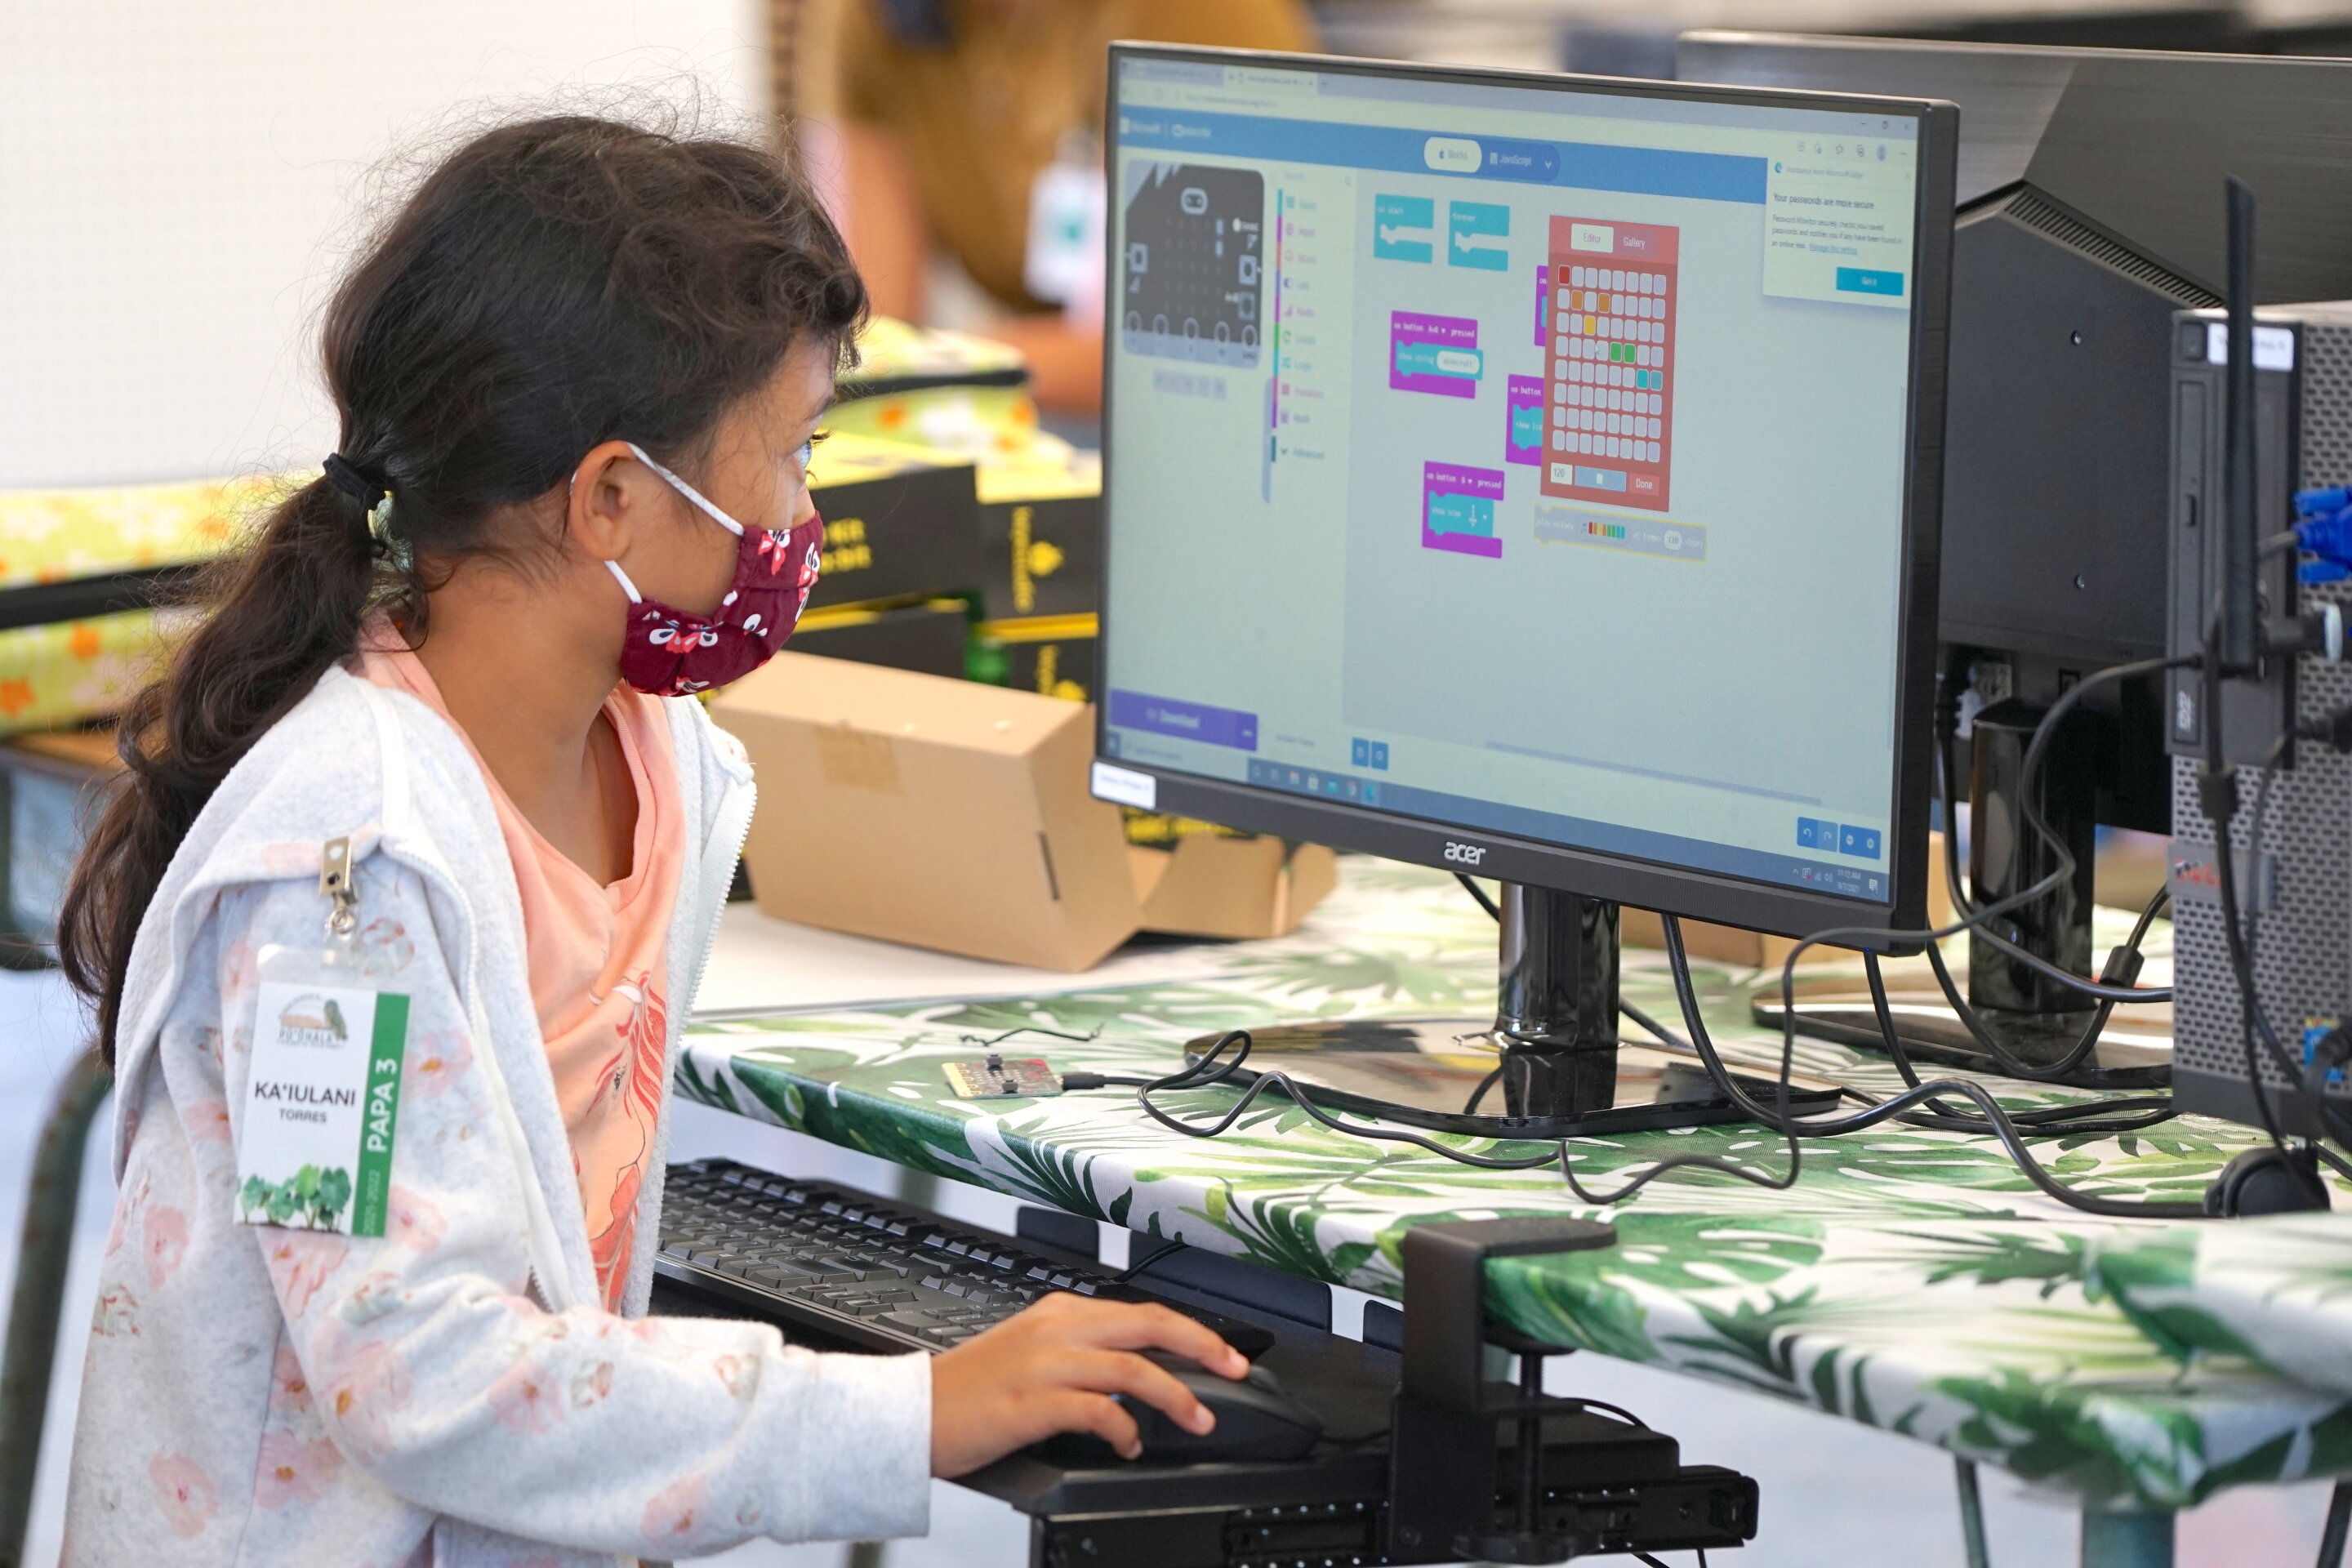 Battery-free MakeCode empowers kids to code sustainably